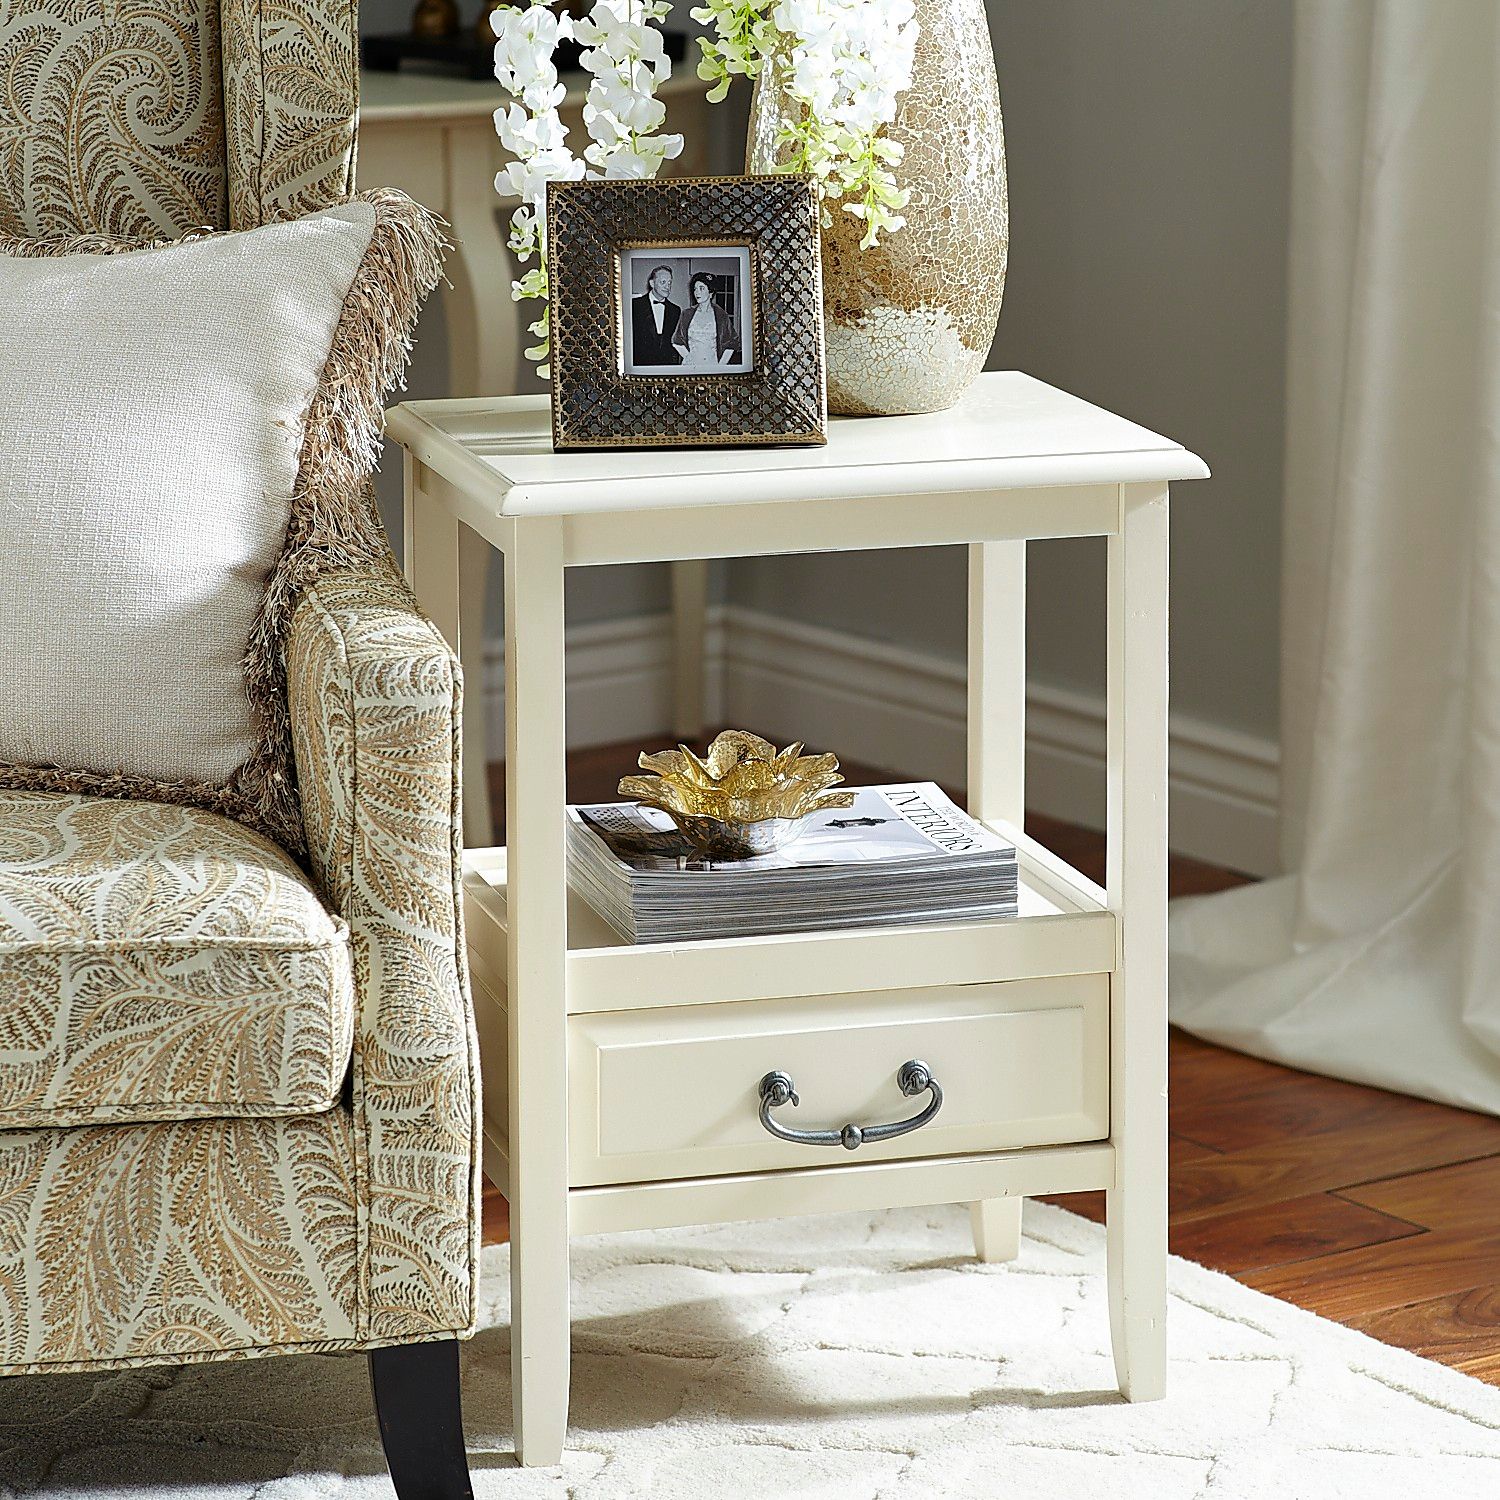 anywhere antique white end table with pull handles pier imports one accent verizon ellipsis wicker furniture set clearance metal patio tables pool covers bunnings frame black